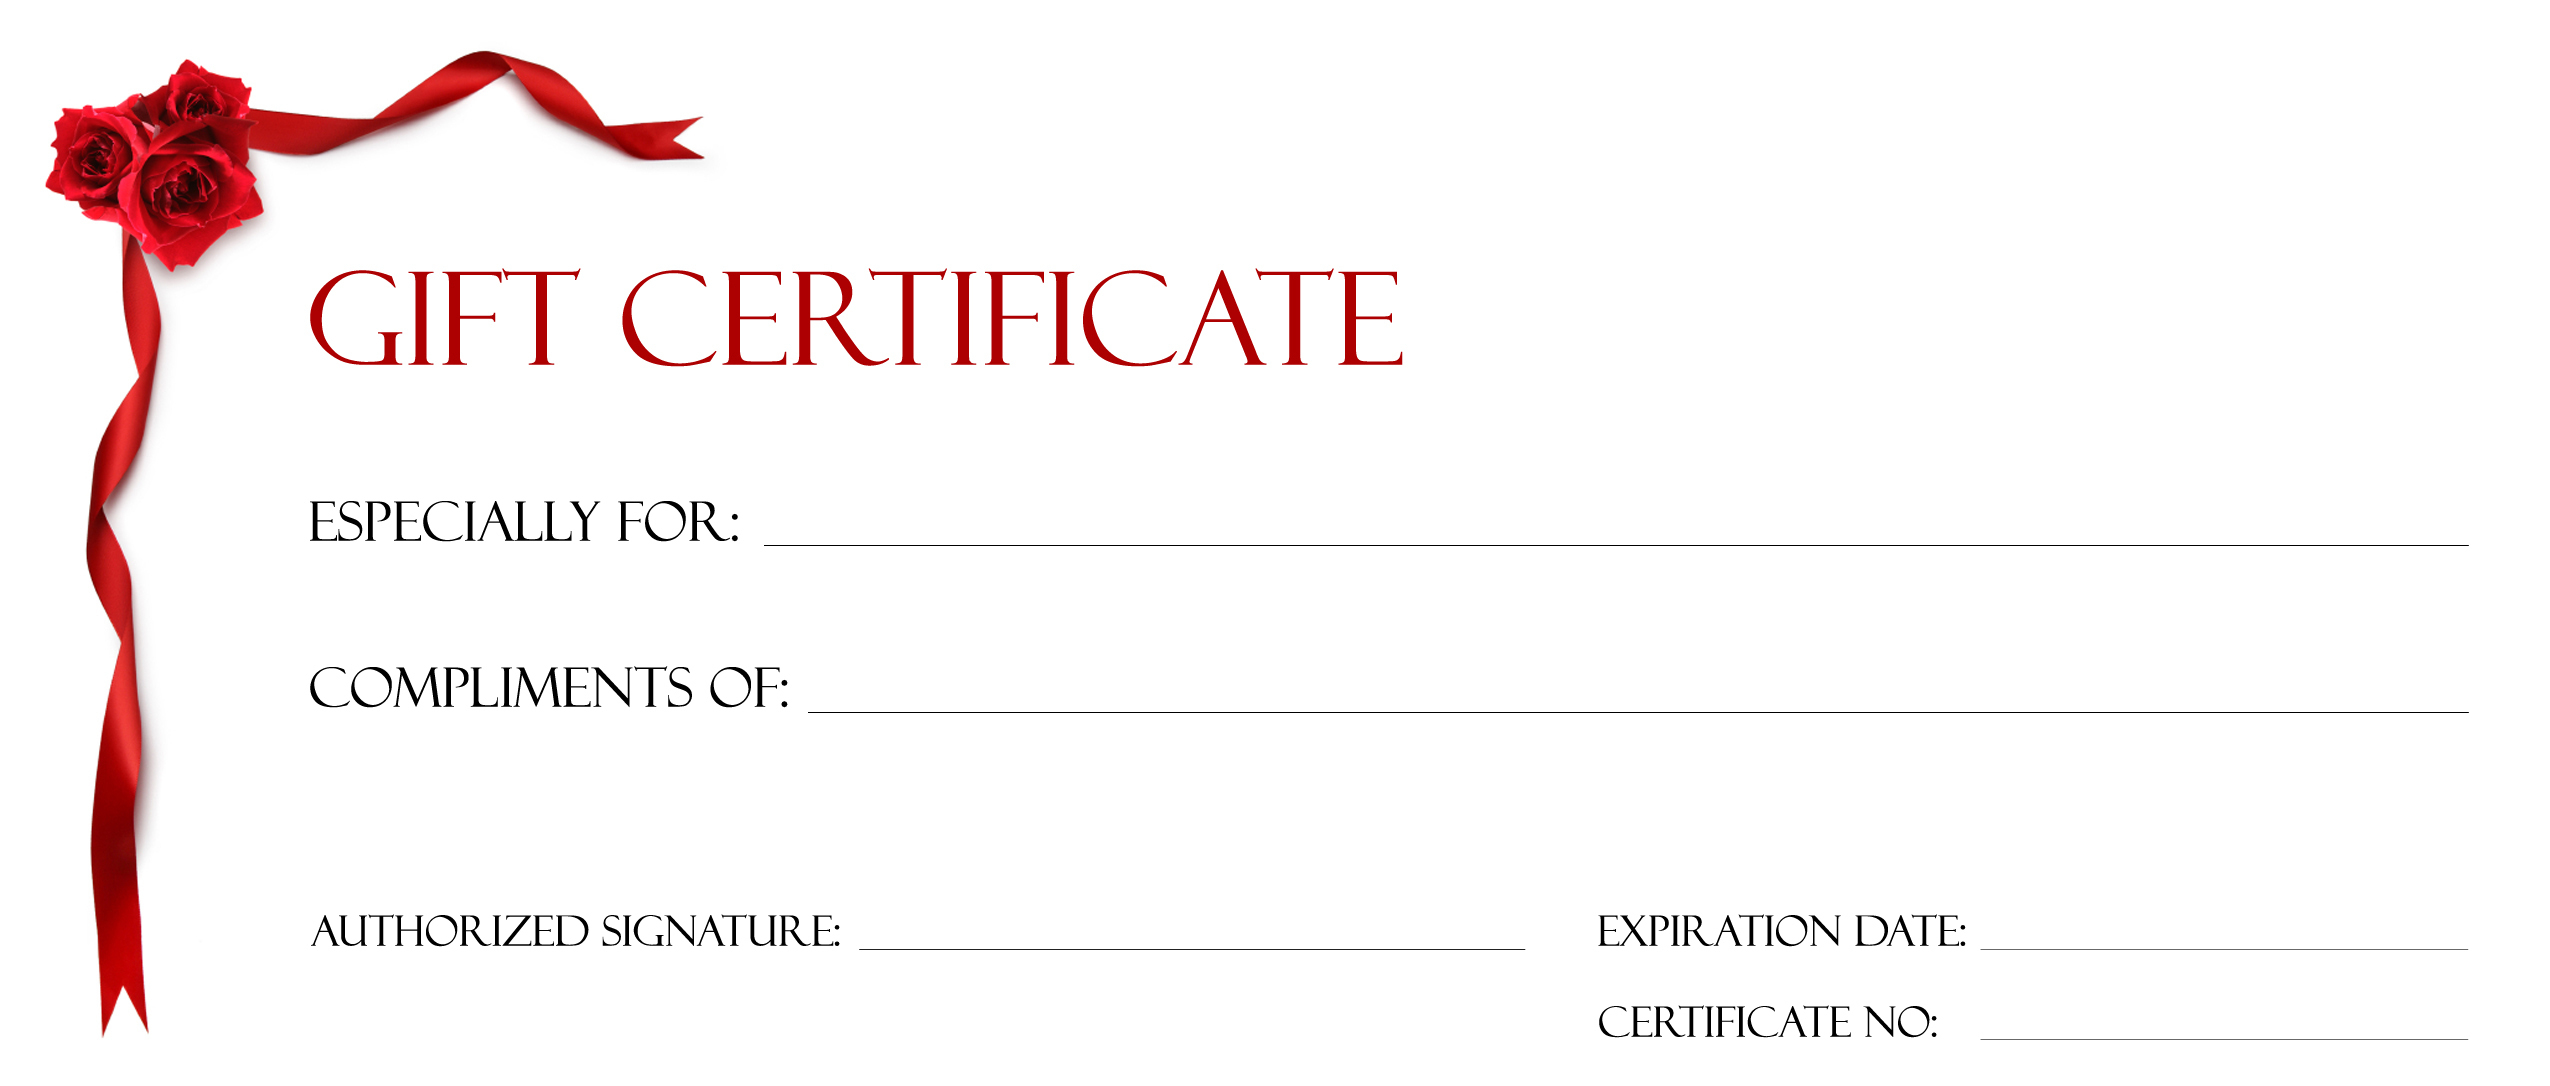 Gift Certificate Template Google Docs - Reeviewer.co - Free Printable Tattoo Gift Certificates